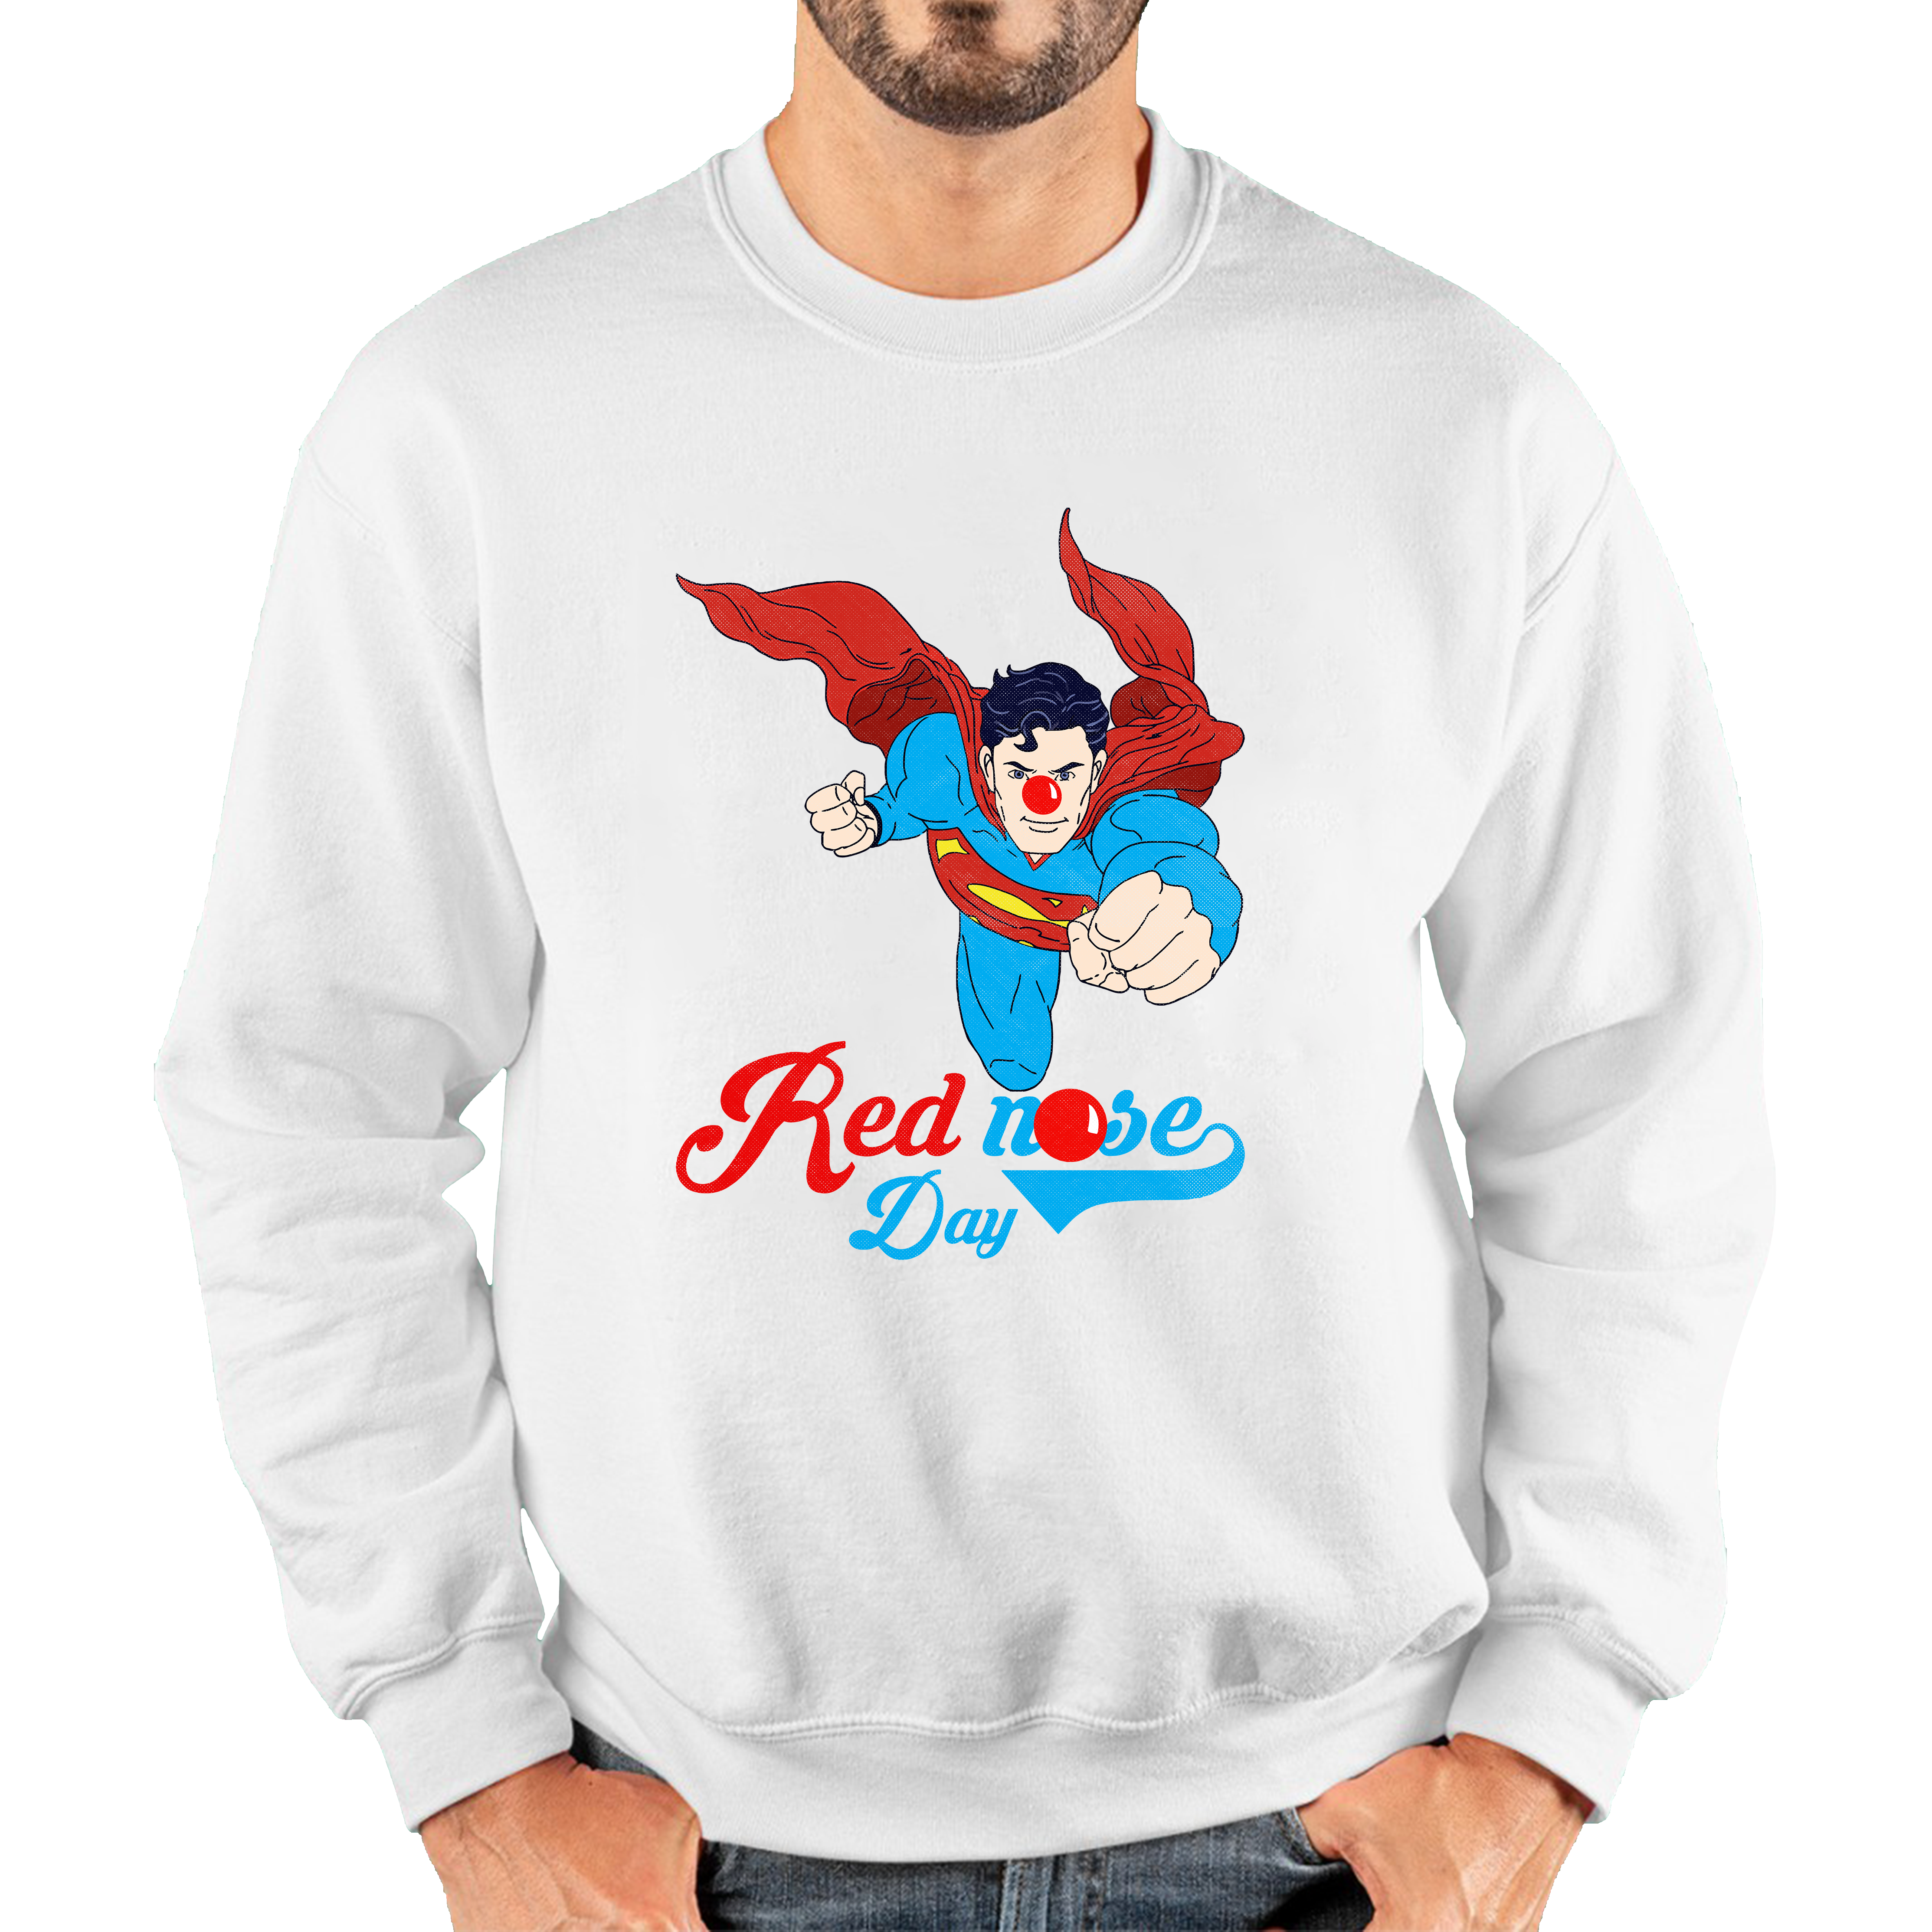 Flying Superman Red Nose Day Comic Superhero Adult Sweatshirt. 50% Goes To Charity